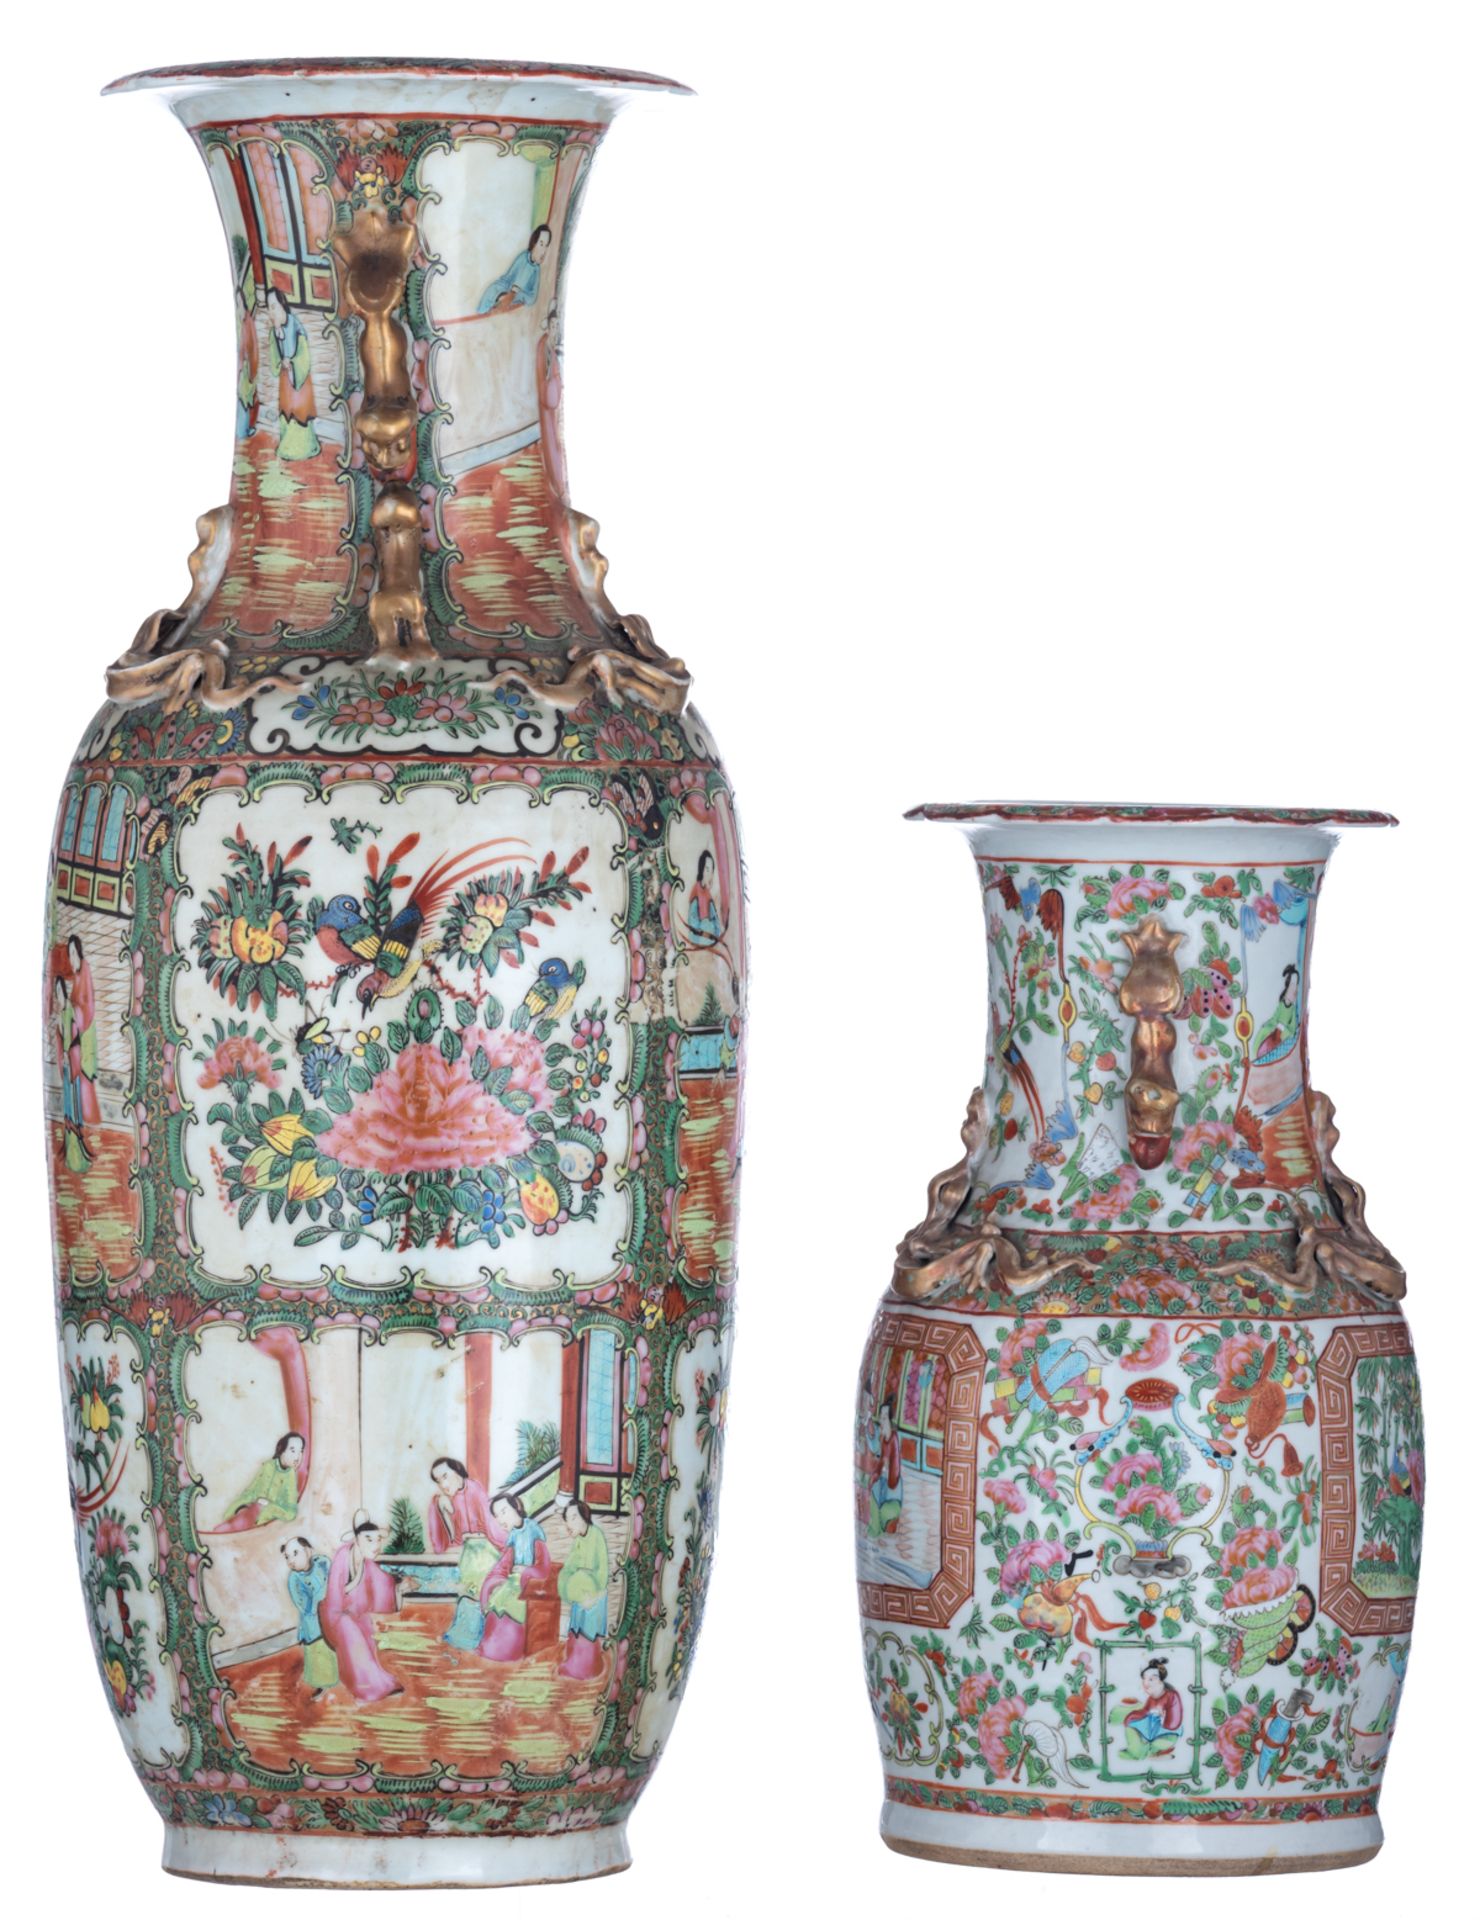 Two Chinese Canton polychrome vases, decorated with figures, birds and flowers, H 35,5 - 60 cm - Image 5 of 7